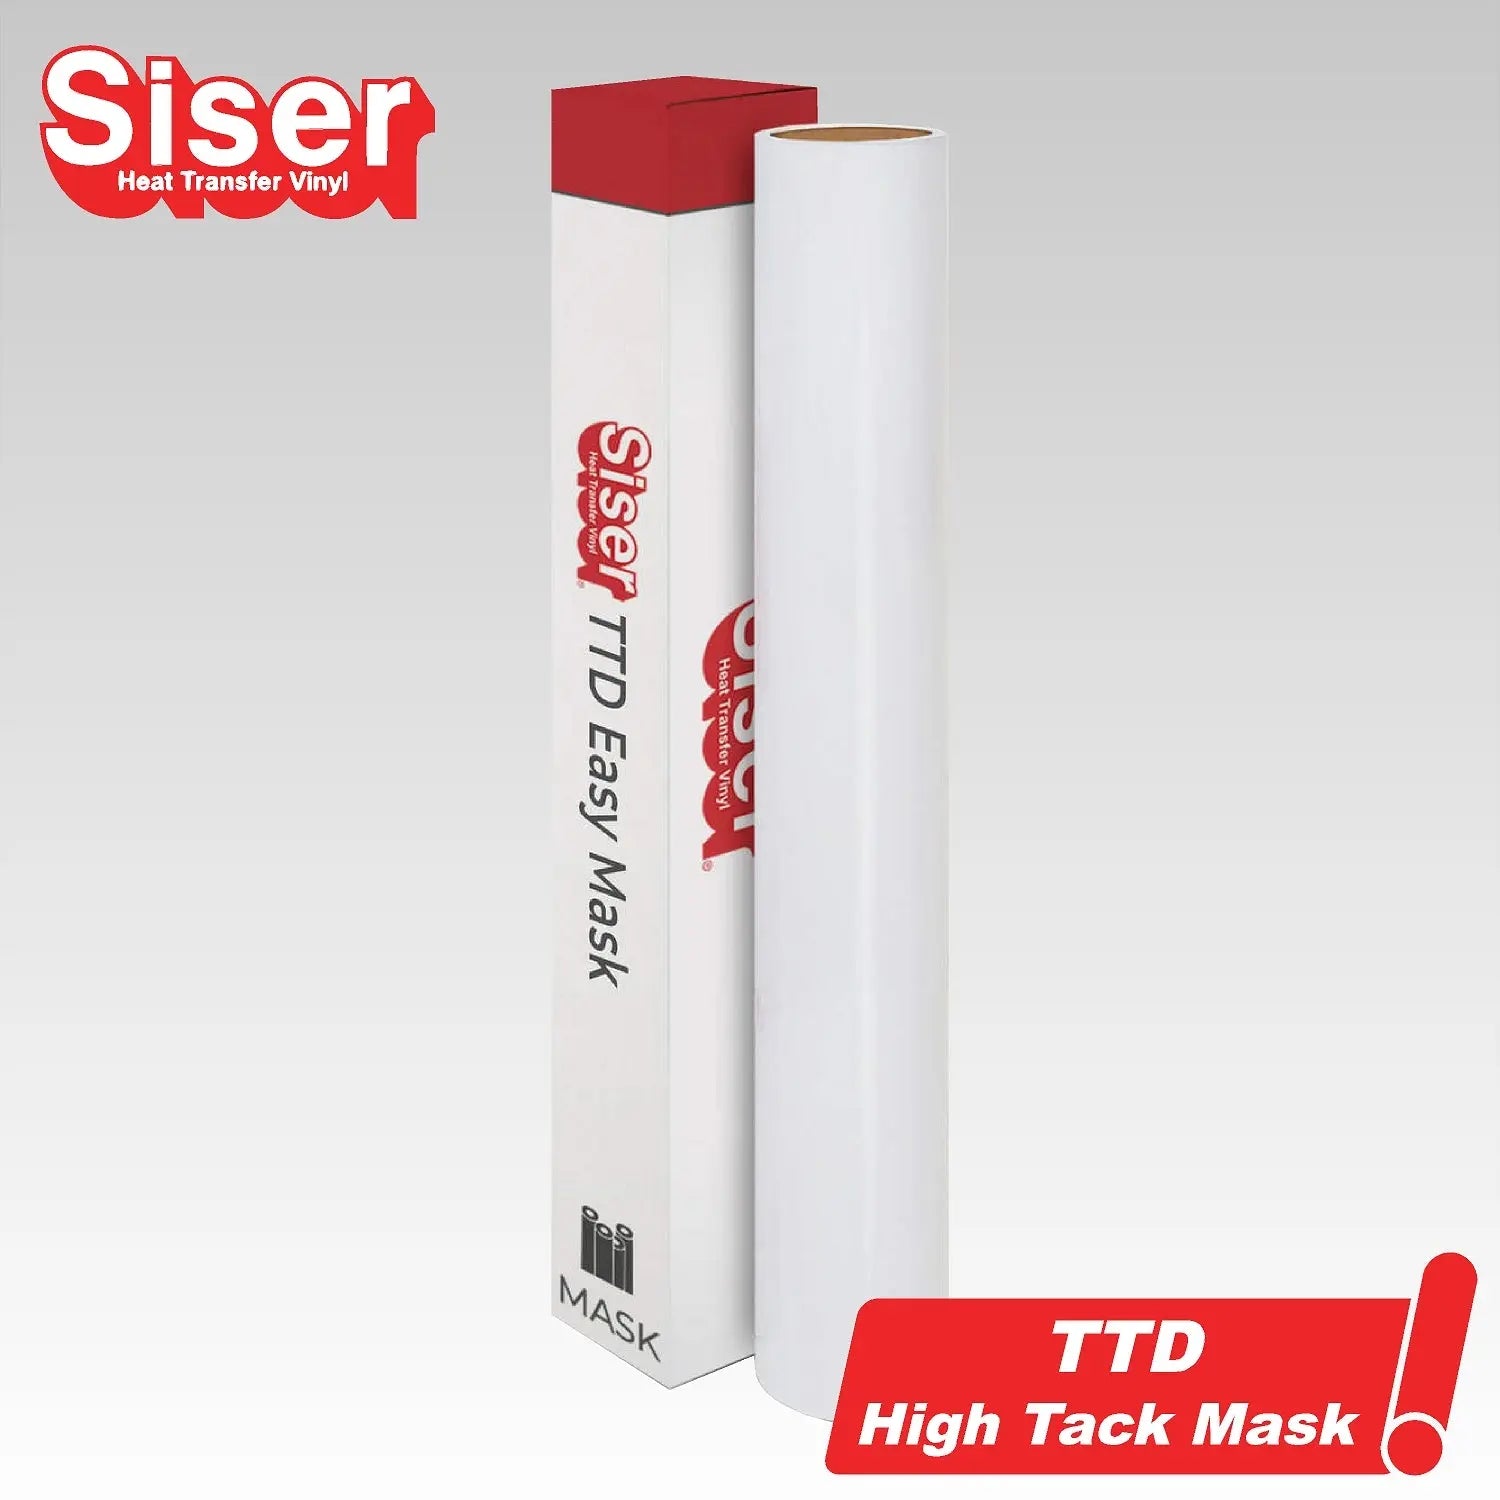  Clear Transfer Tape for Vinyl Adhesive and HTV Heat